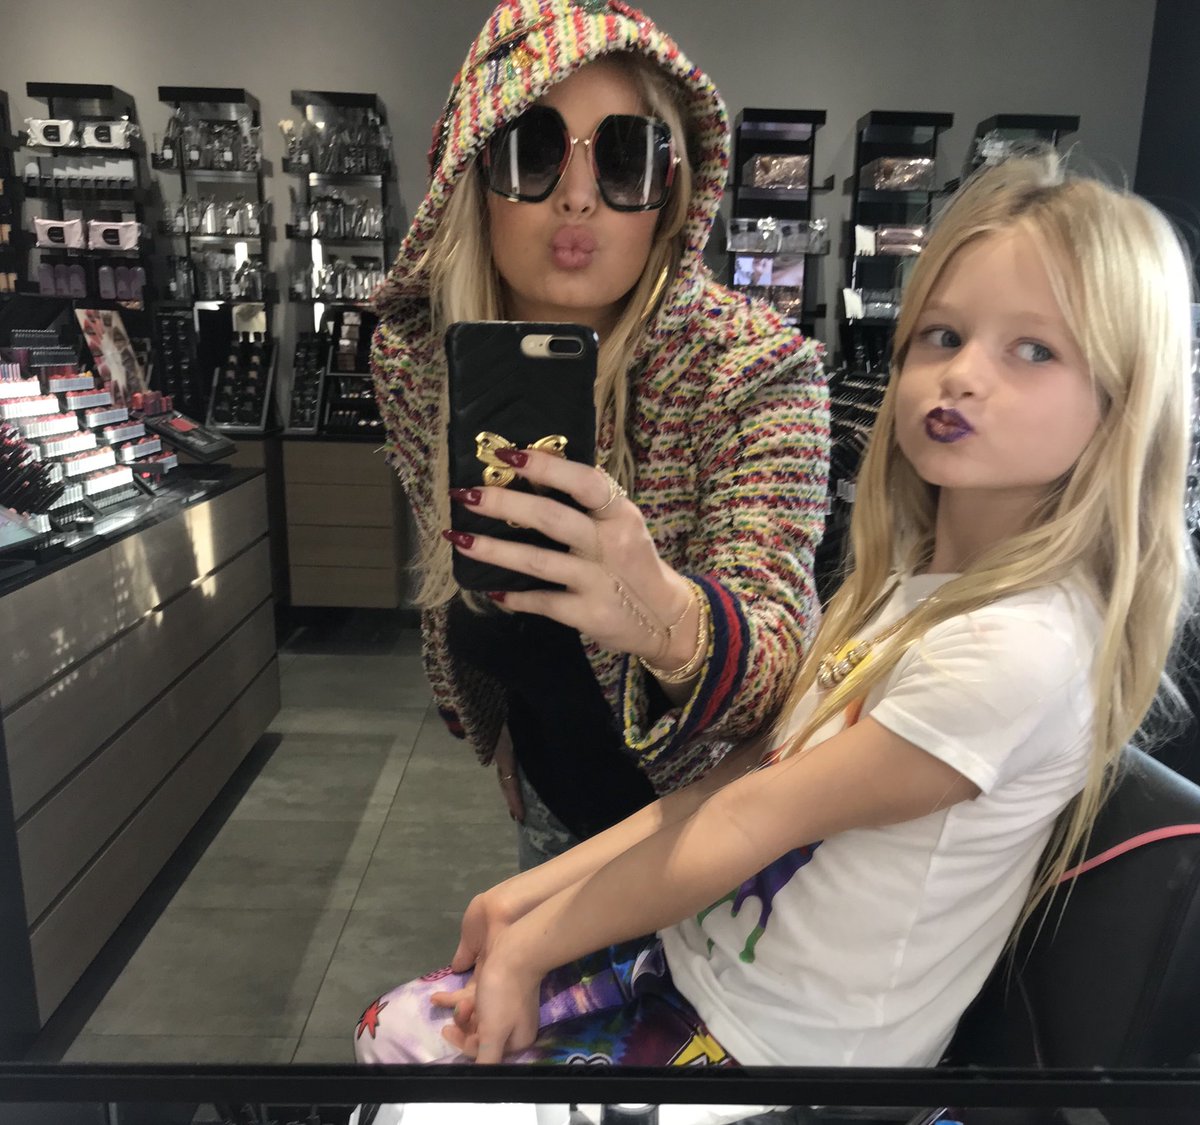 This is NOT an #ad, @MACcosmetics is my daughter’s favorite store! Mommy-Daughter Day with #MAXIDREW #girlygoth https://t.co/uF0Bq7GG0h